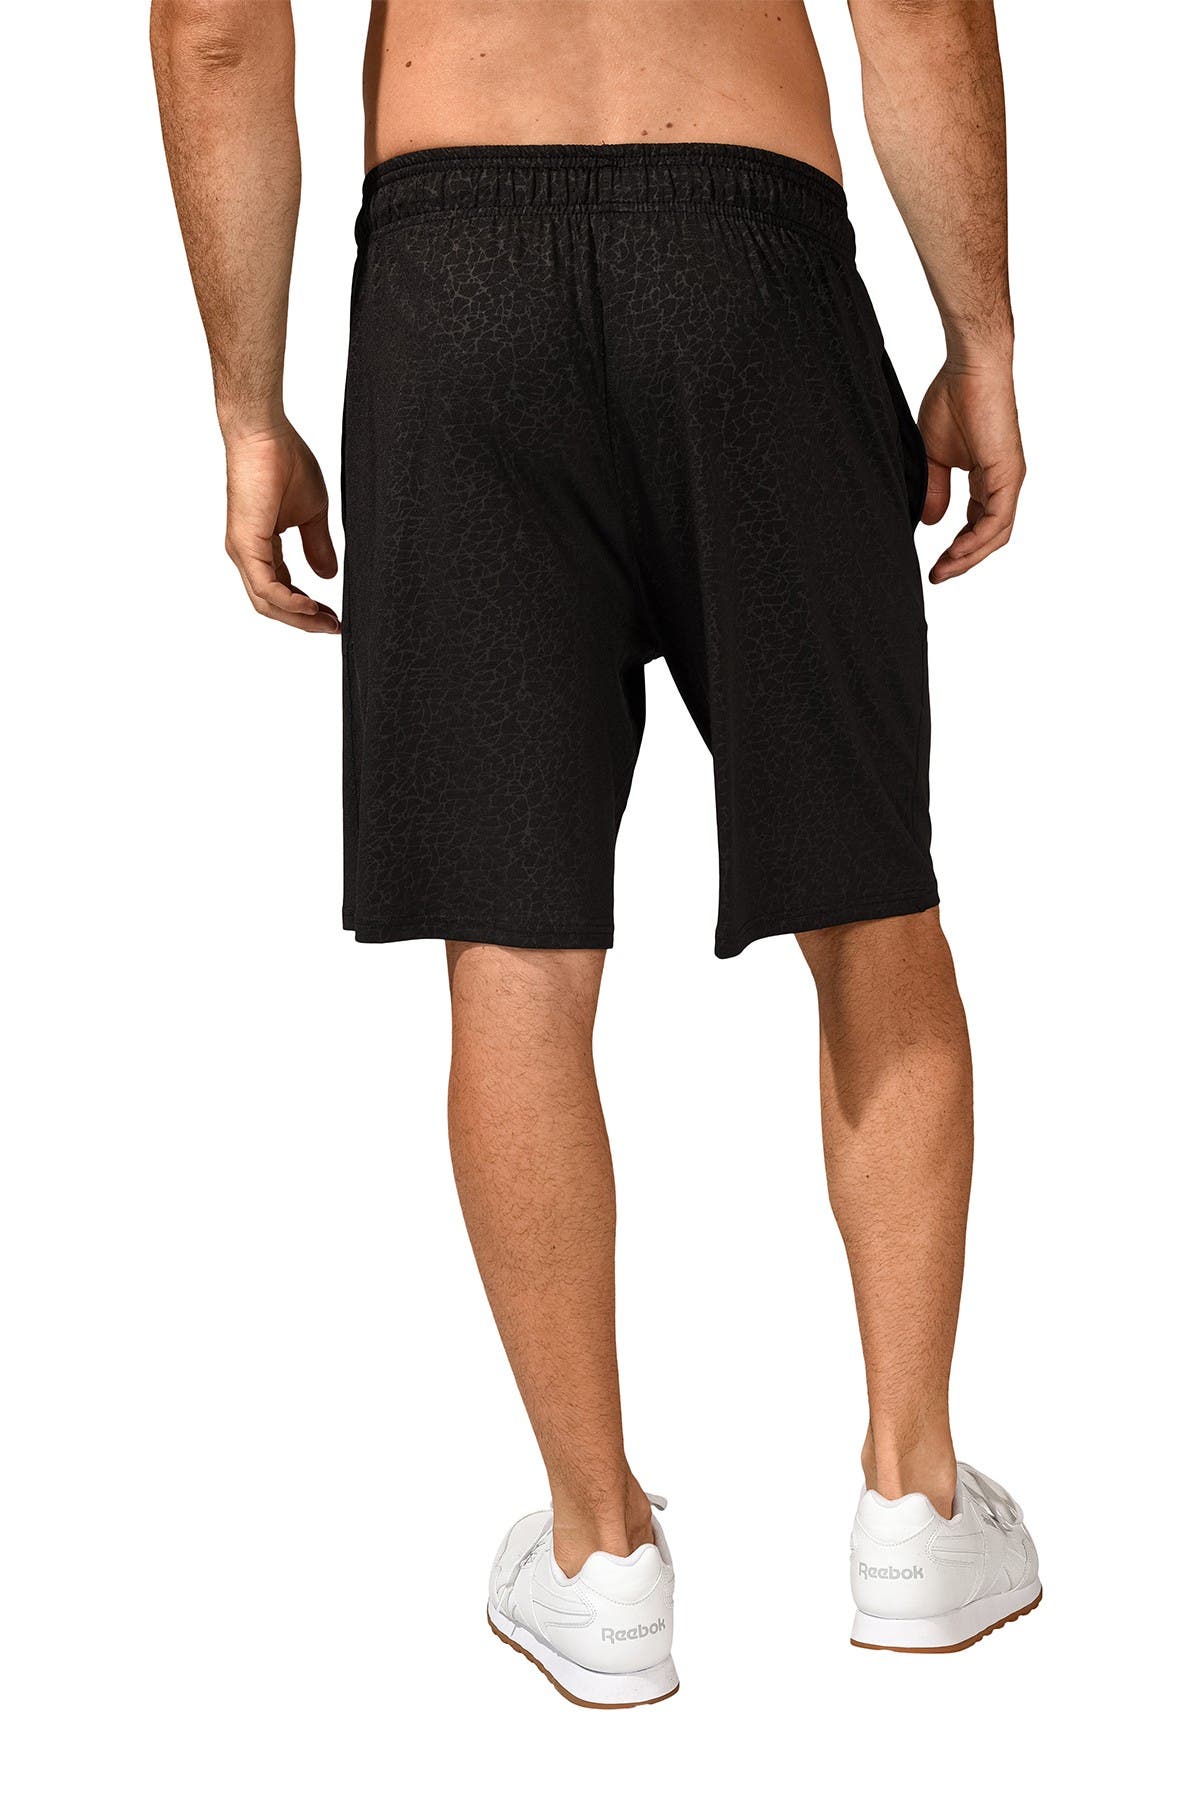 90 Degree By Reflex Embossed Basketball Shorts In Charcoal8